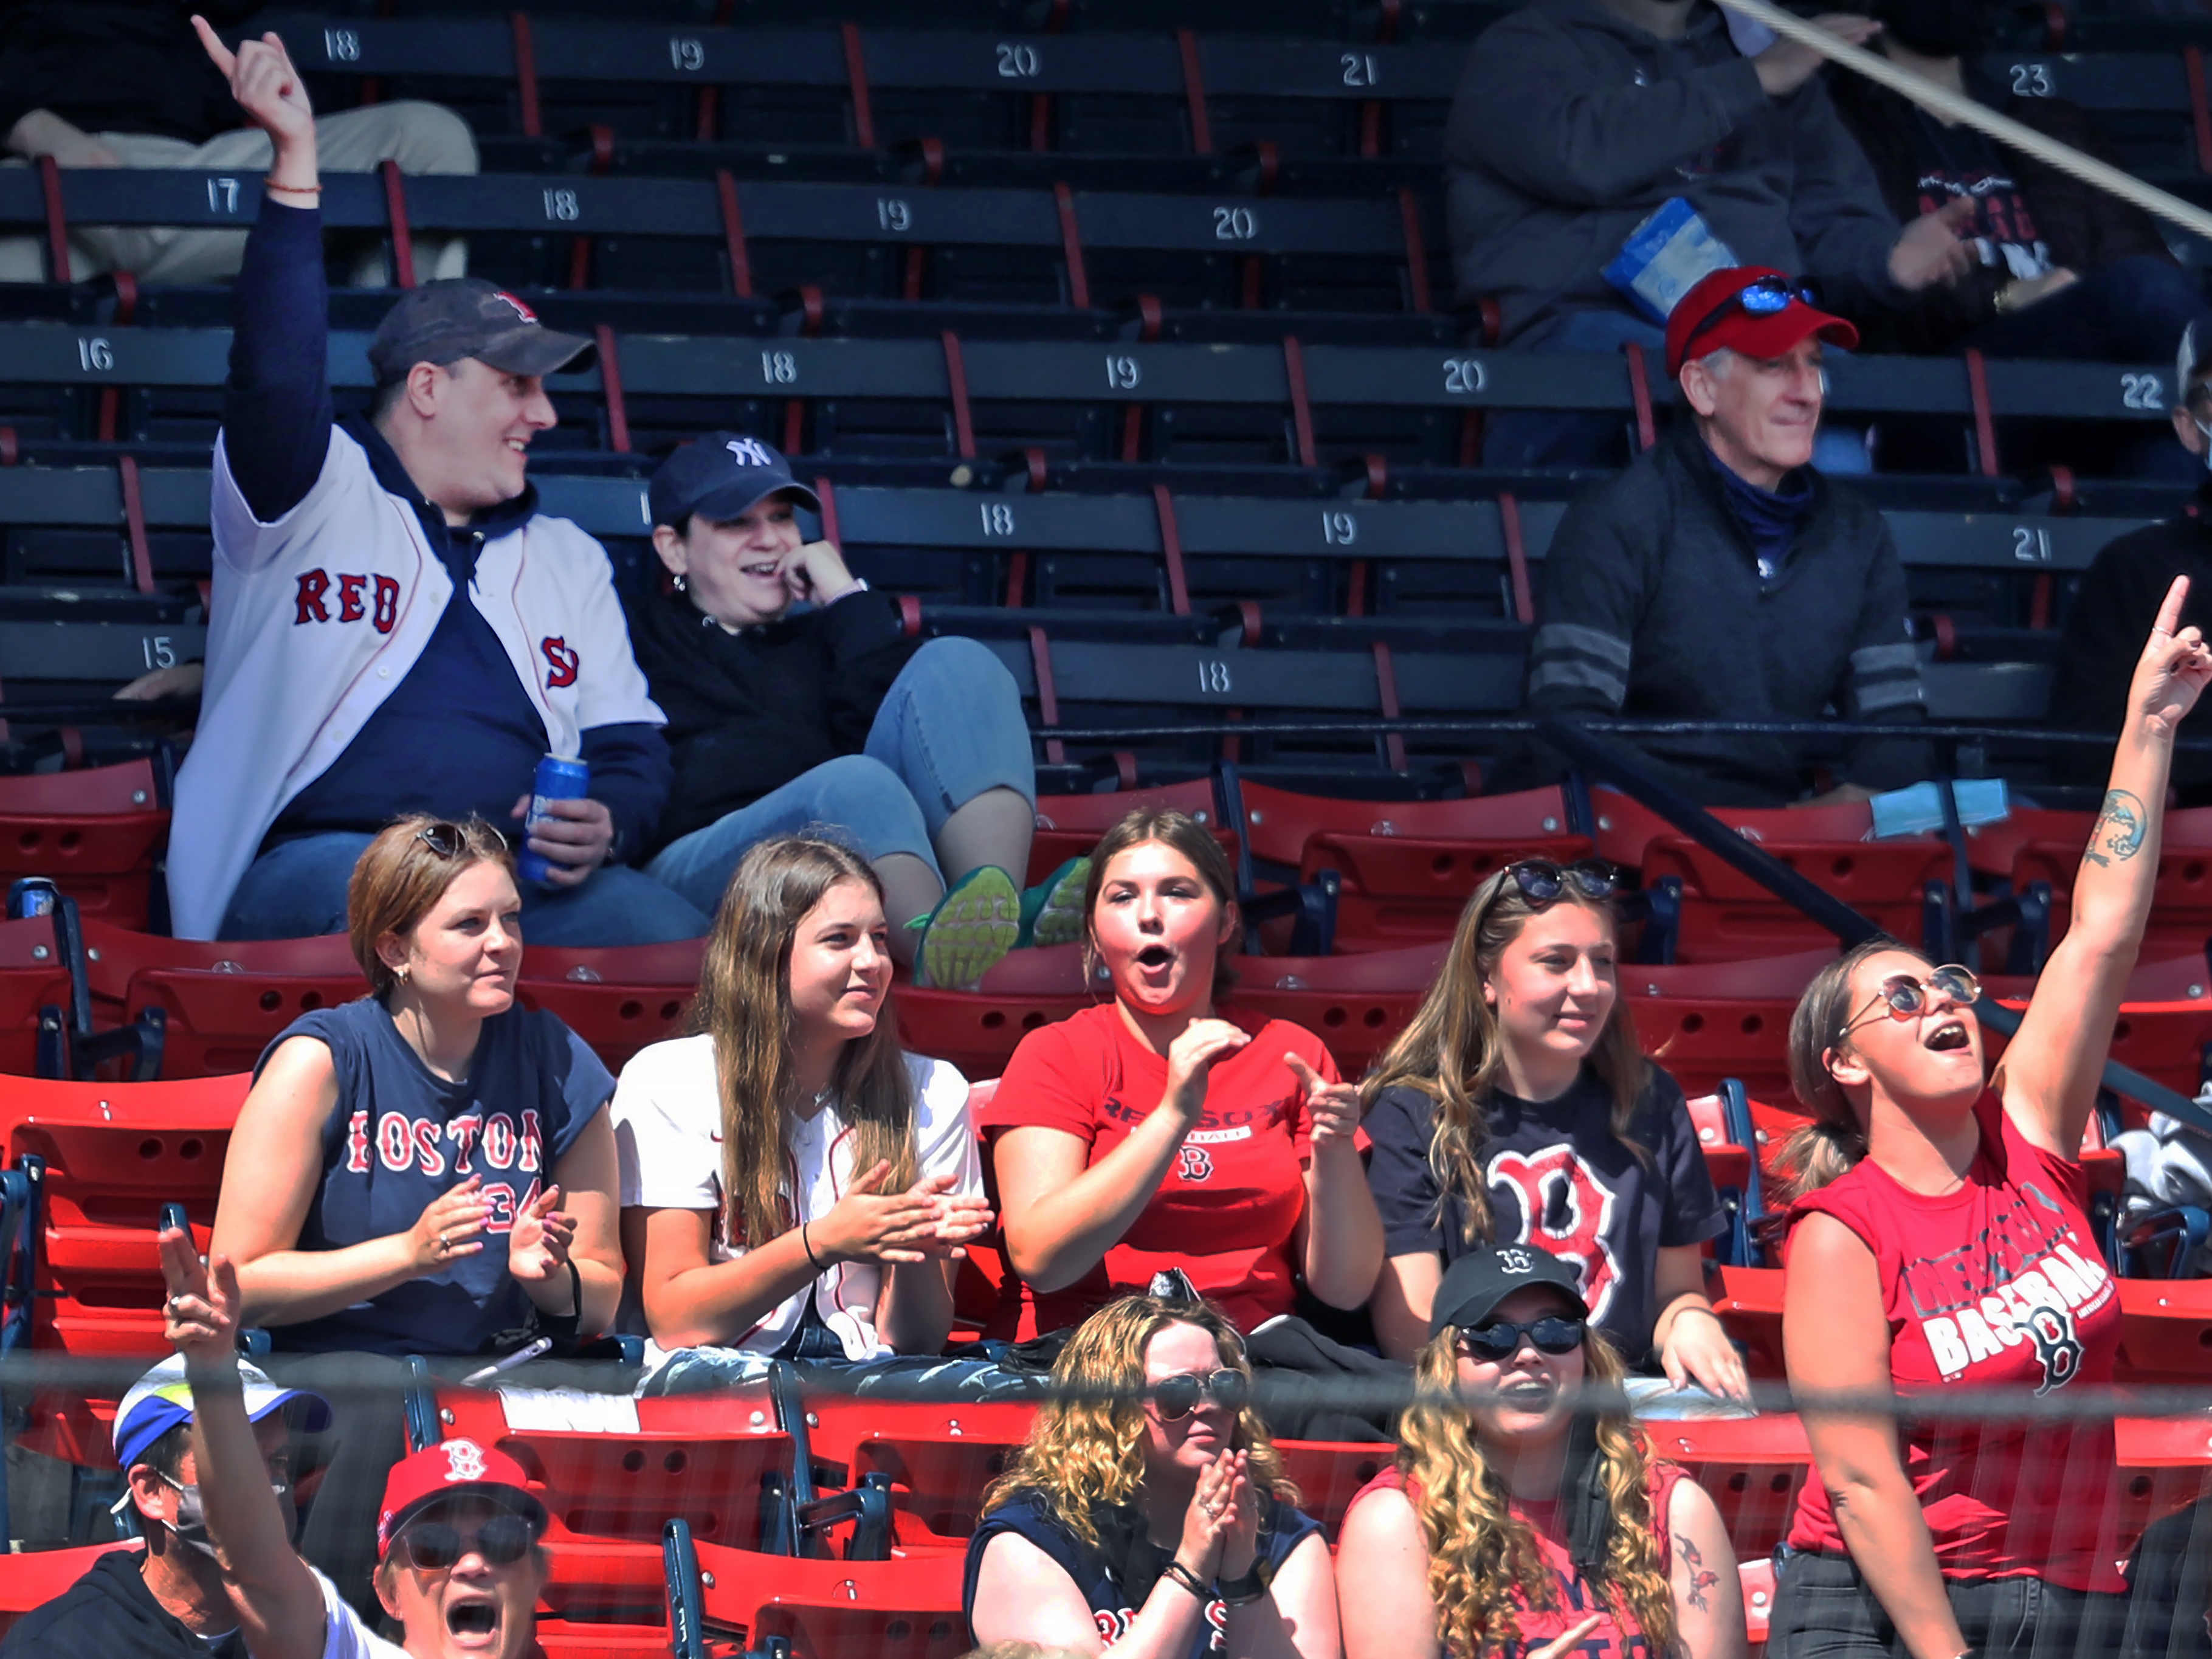 Boston Red Sox attendance down in 2021, but club still encouraged